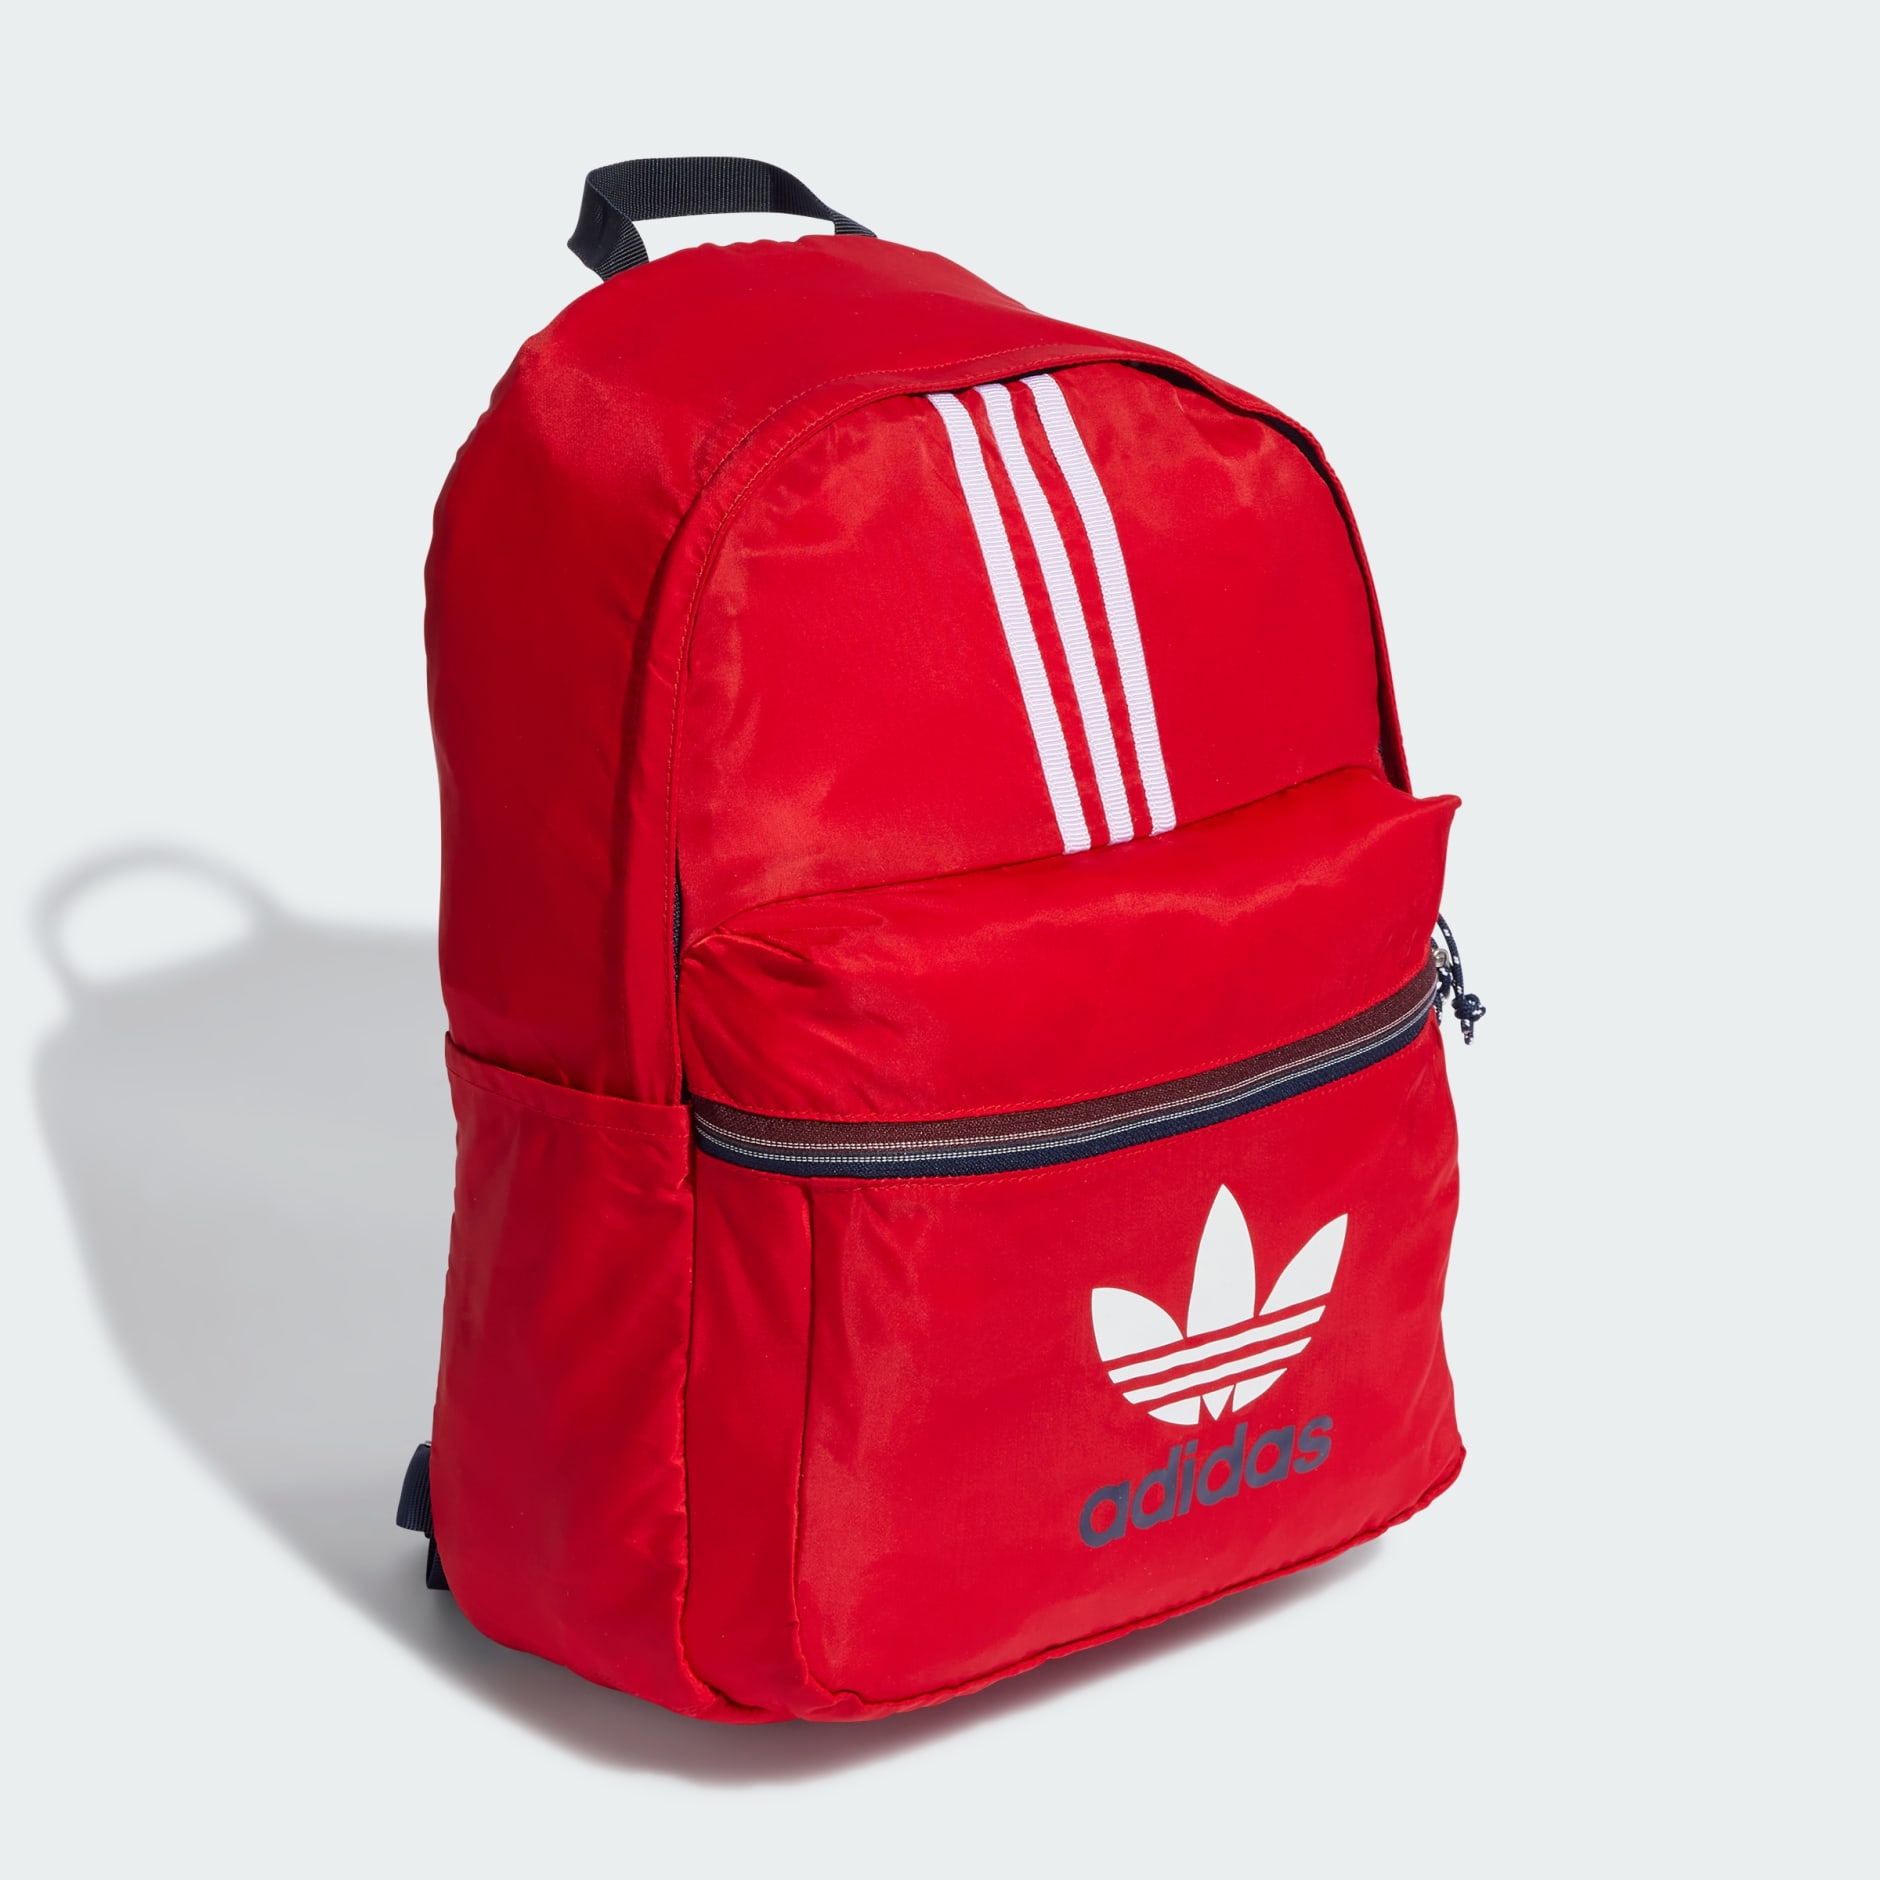 Accessories - Archive Backpack Oman adidas Adicolor Red | 